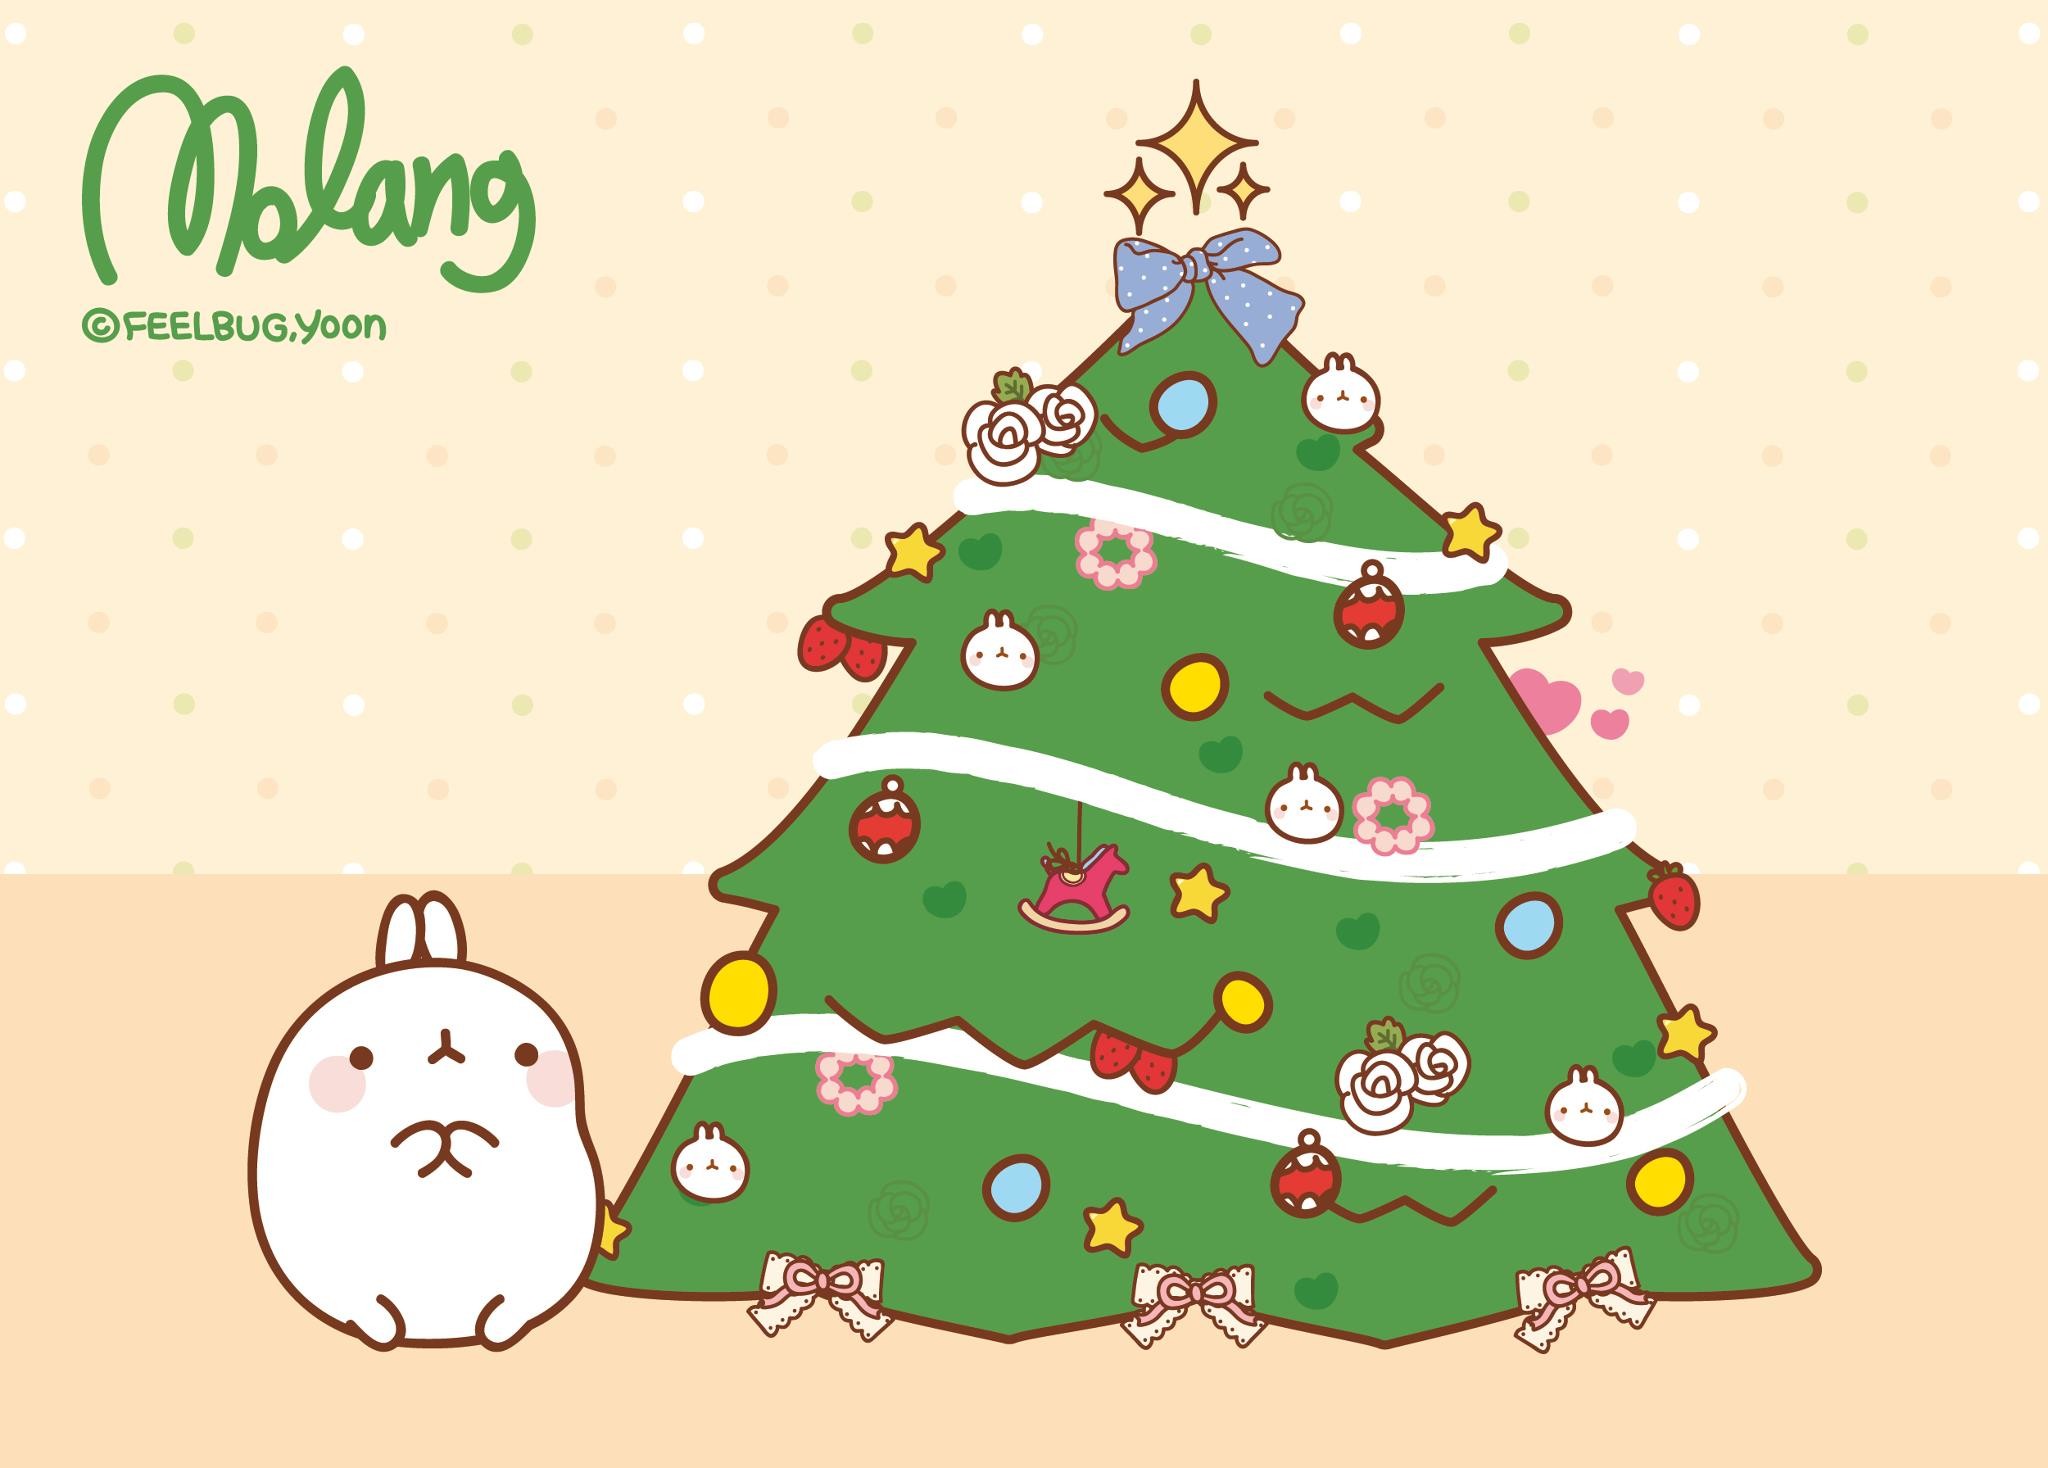 San X Molang Christmas Desktop Wallpapers – Here are 3 super cute Molang Desktop Backgrounds for Christmas Click each image to be taken to the full size